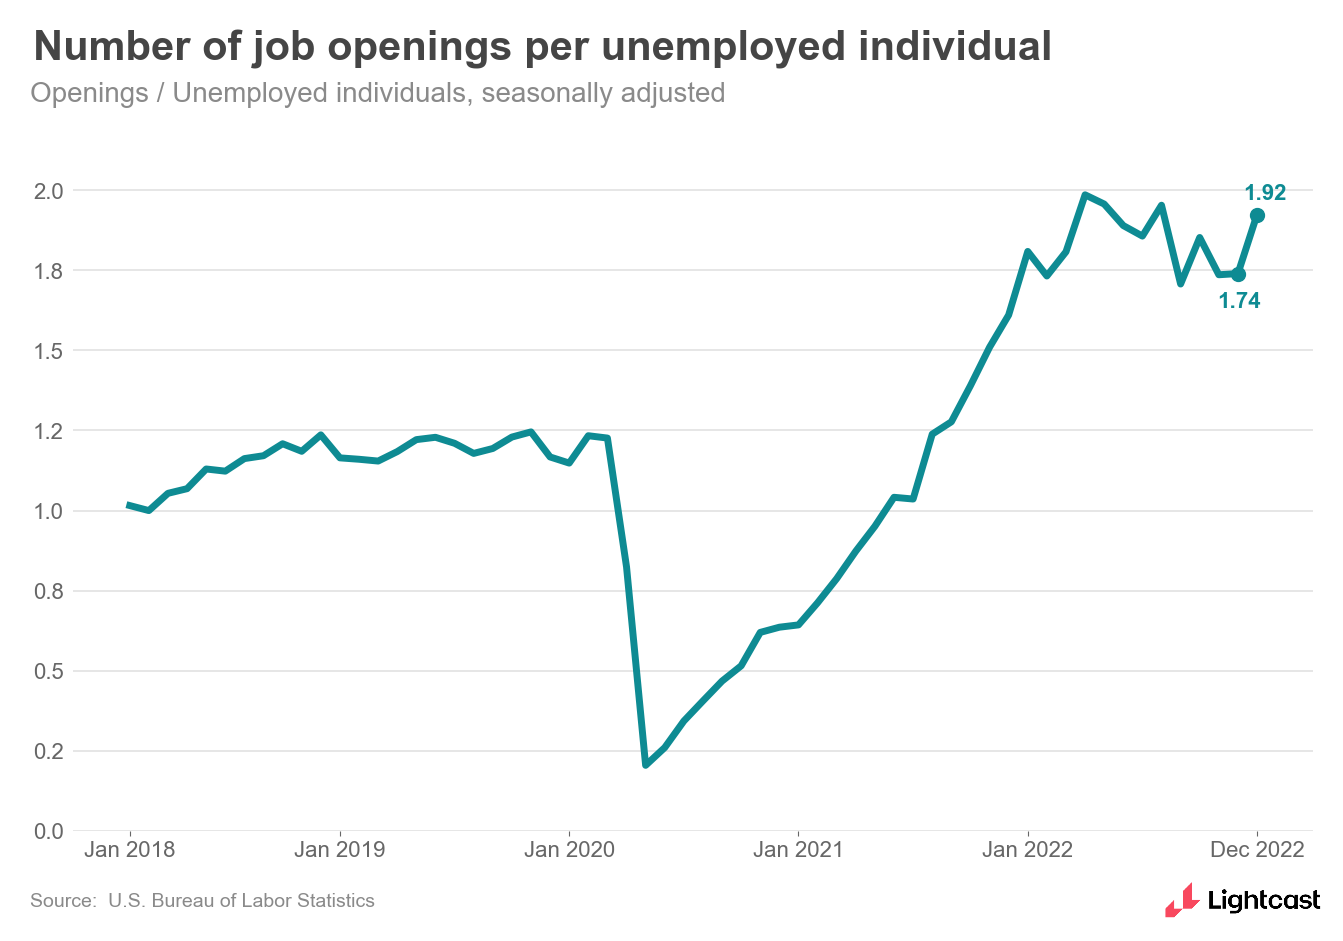 job openings per unemployed person